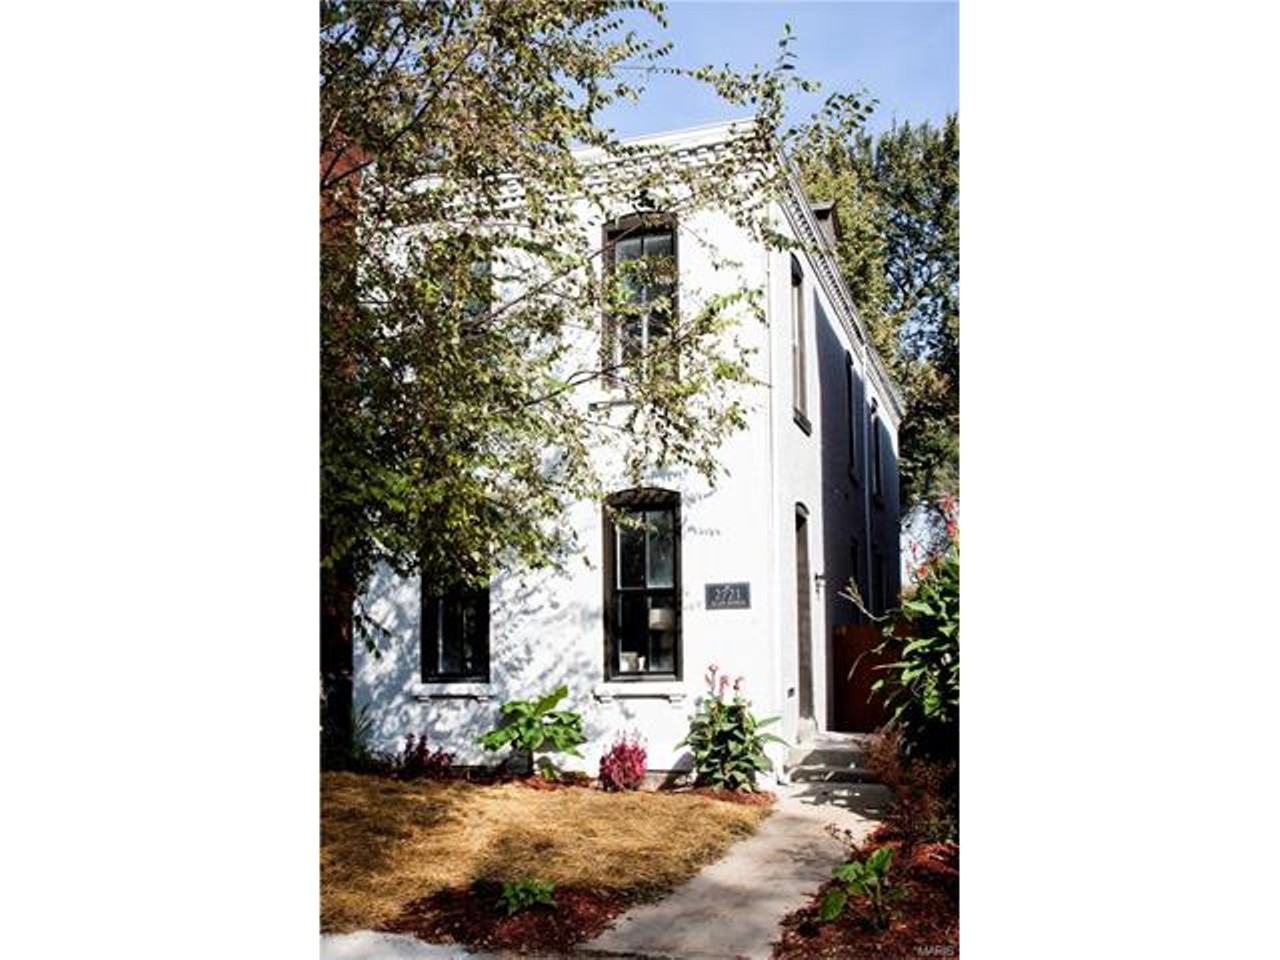 2721 Allen Avenue
$179,900
3 beds / 2 baths / 1,632 sqft
This thre?e-???bedroom home is newly rehabbed -- and you?'ll be able to? tell ?the minute you take a step inside. You'll notice laminate flooring on the first floor, recessed lighting, high ceilings, an open floor plan, exposed brick and many other features. It also happens to have a second floor laundry room.